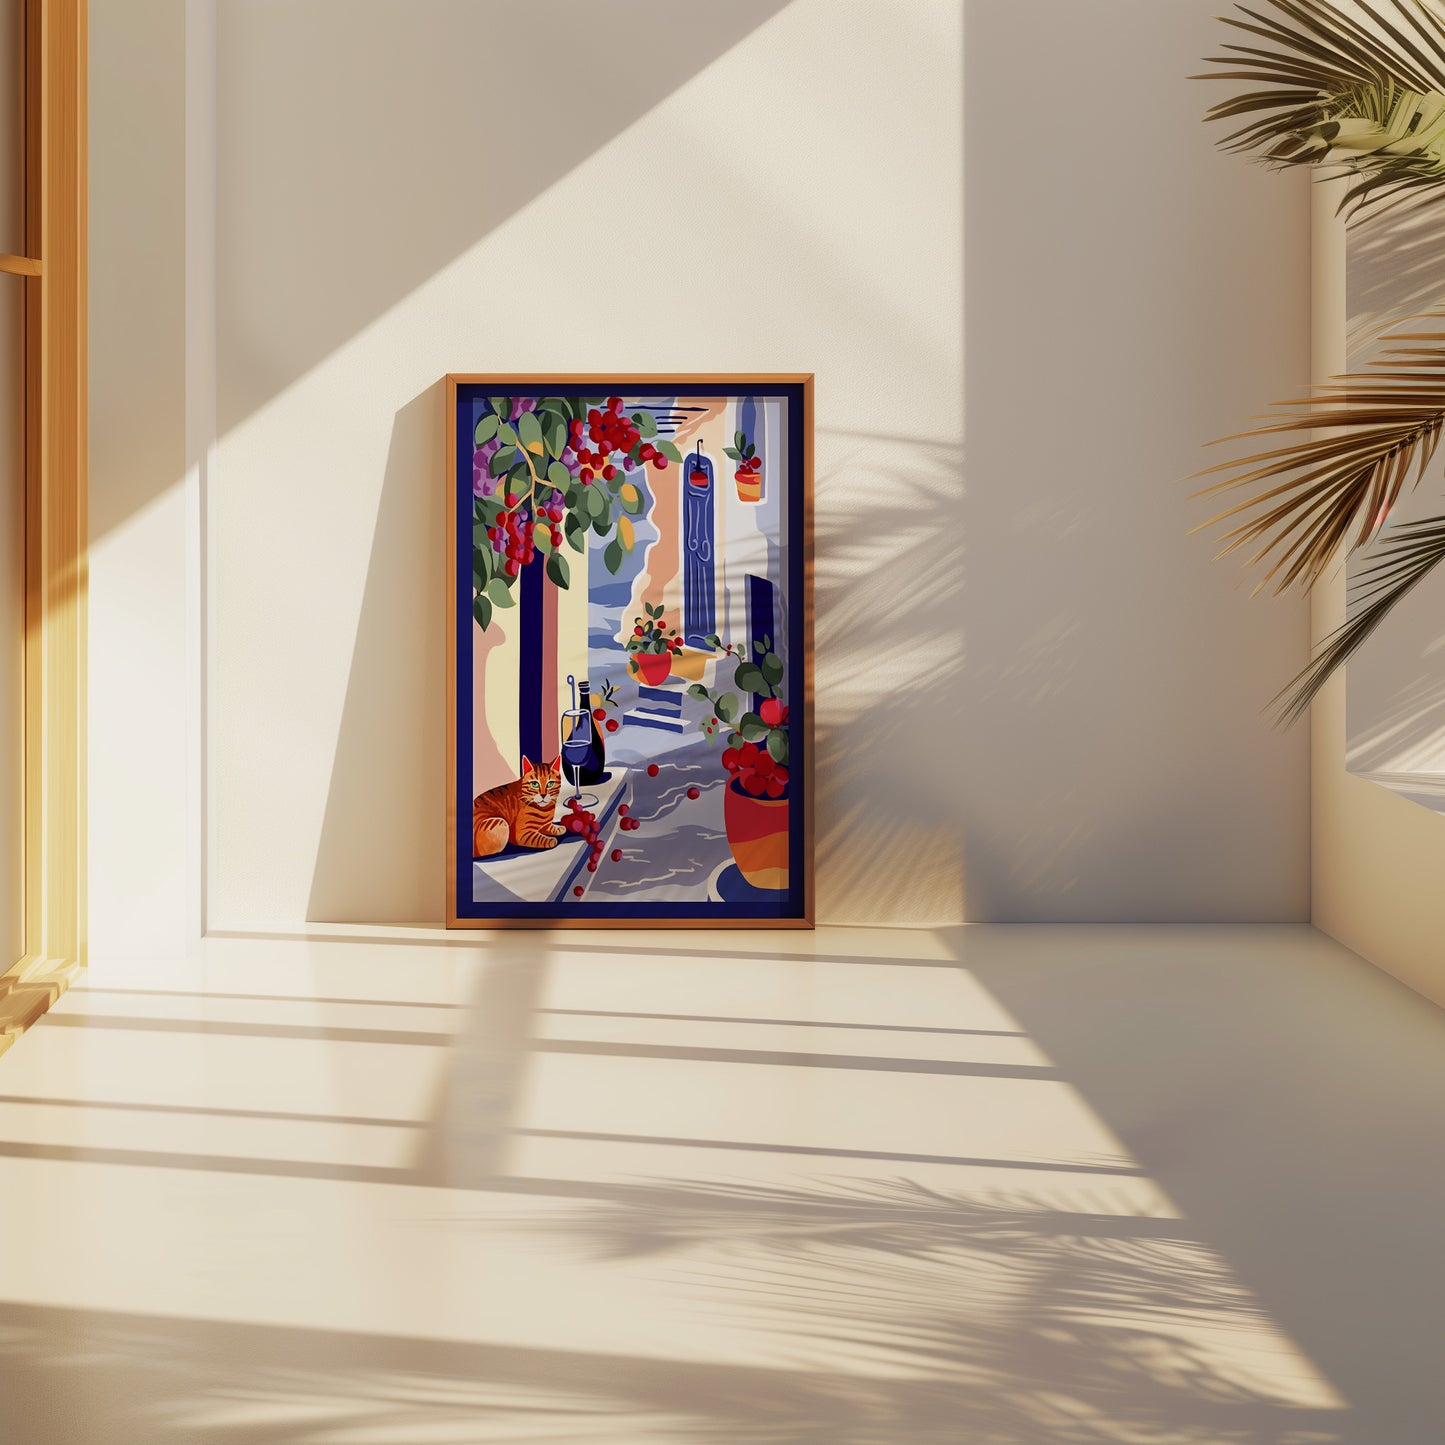 A colorful framed artwork placed on a sunlit floor leaning against a wall.